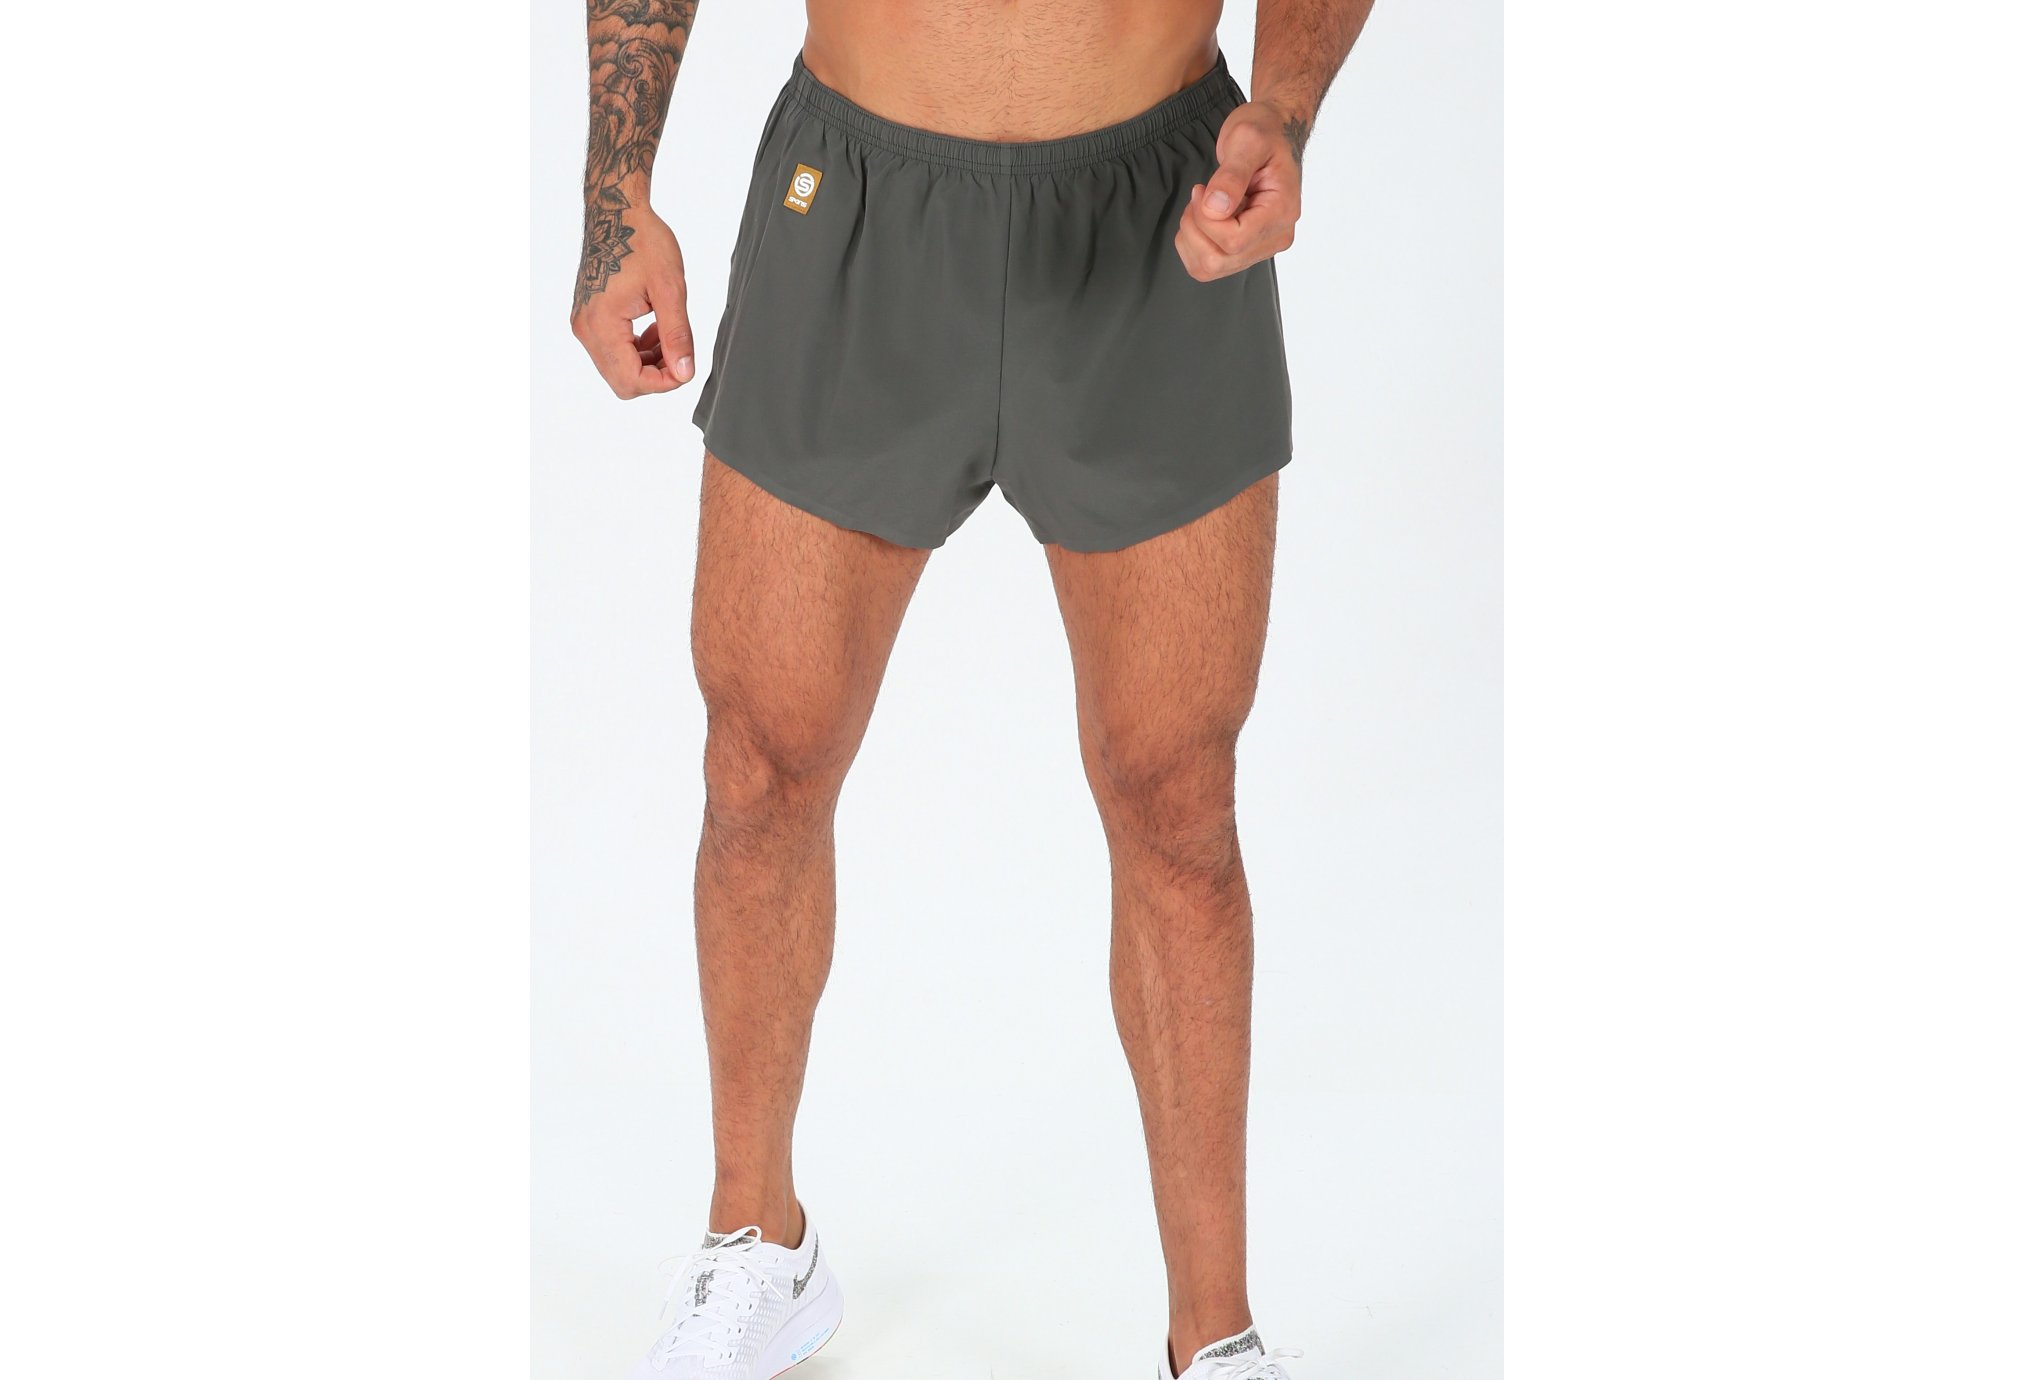 Skins Activewear standby 2 run m dittique vtements homme